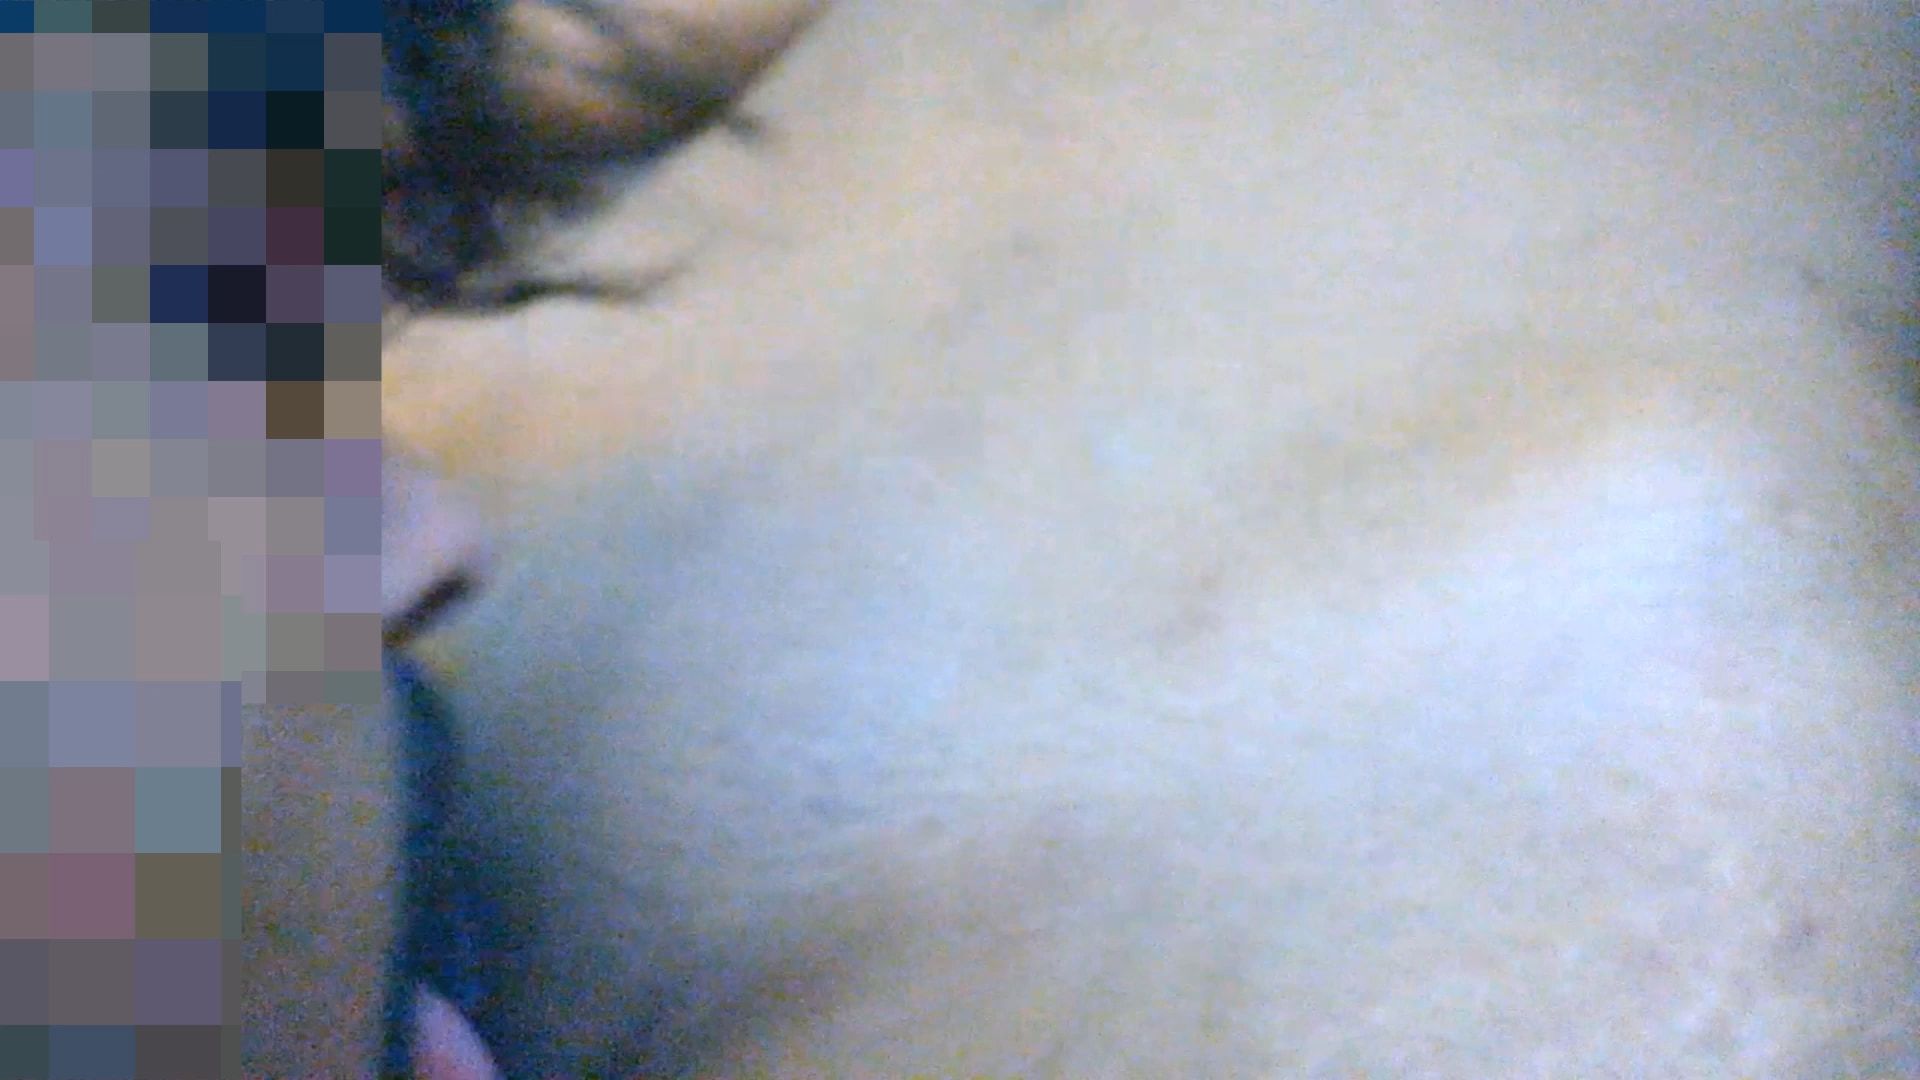 Sucking wife Priya hairy pussy and swallowing all her juice #2